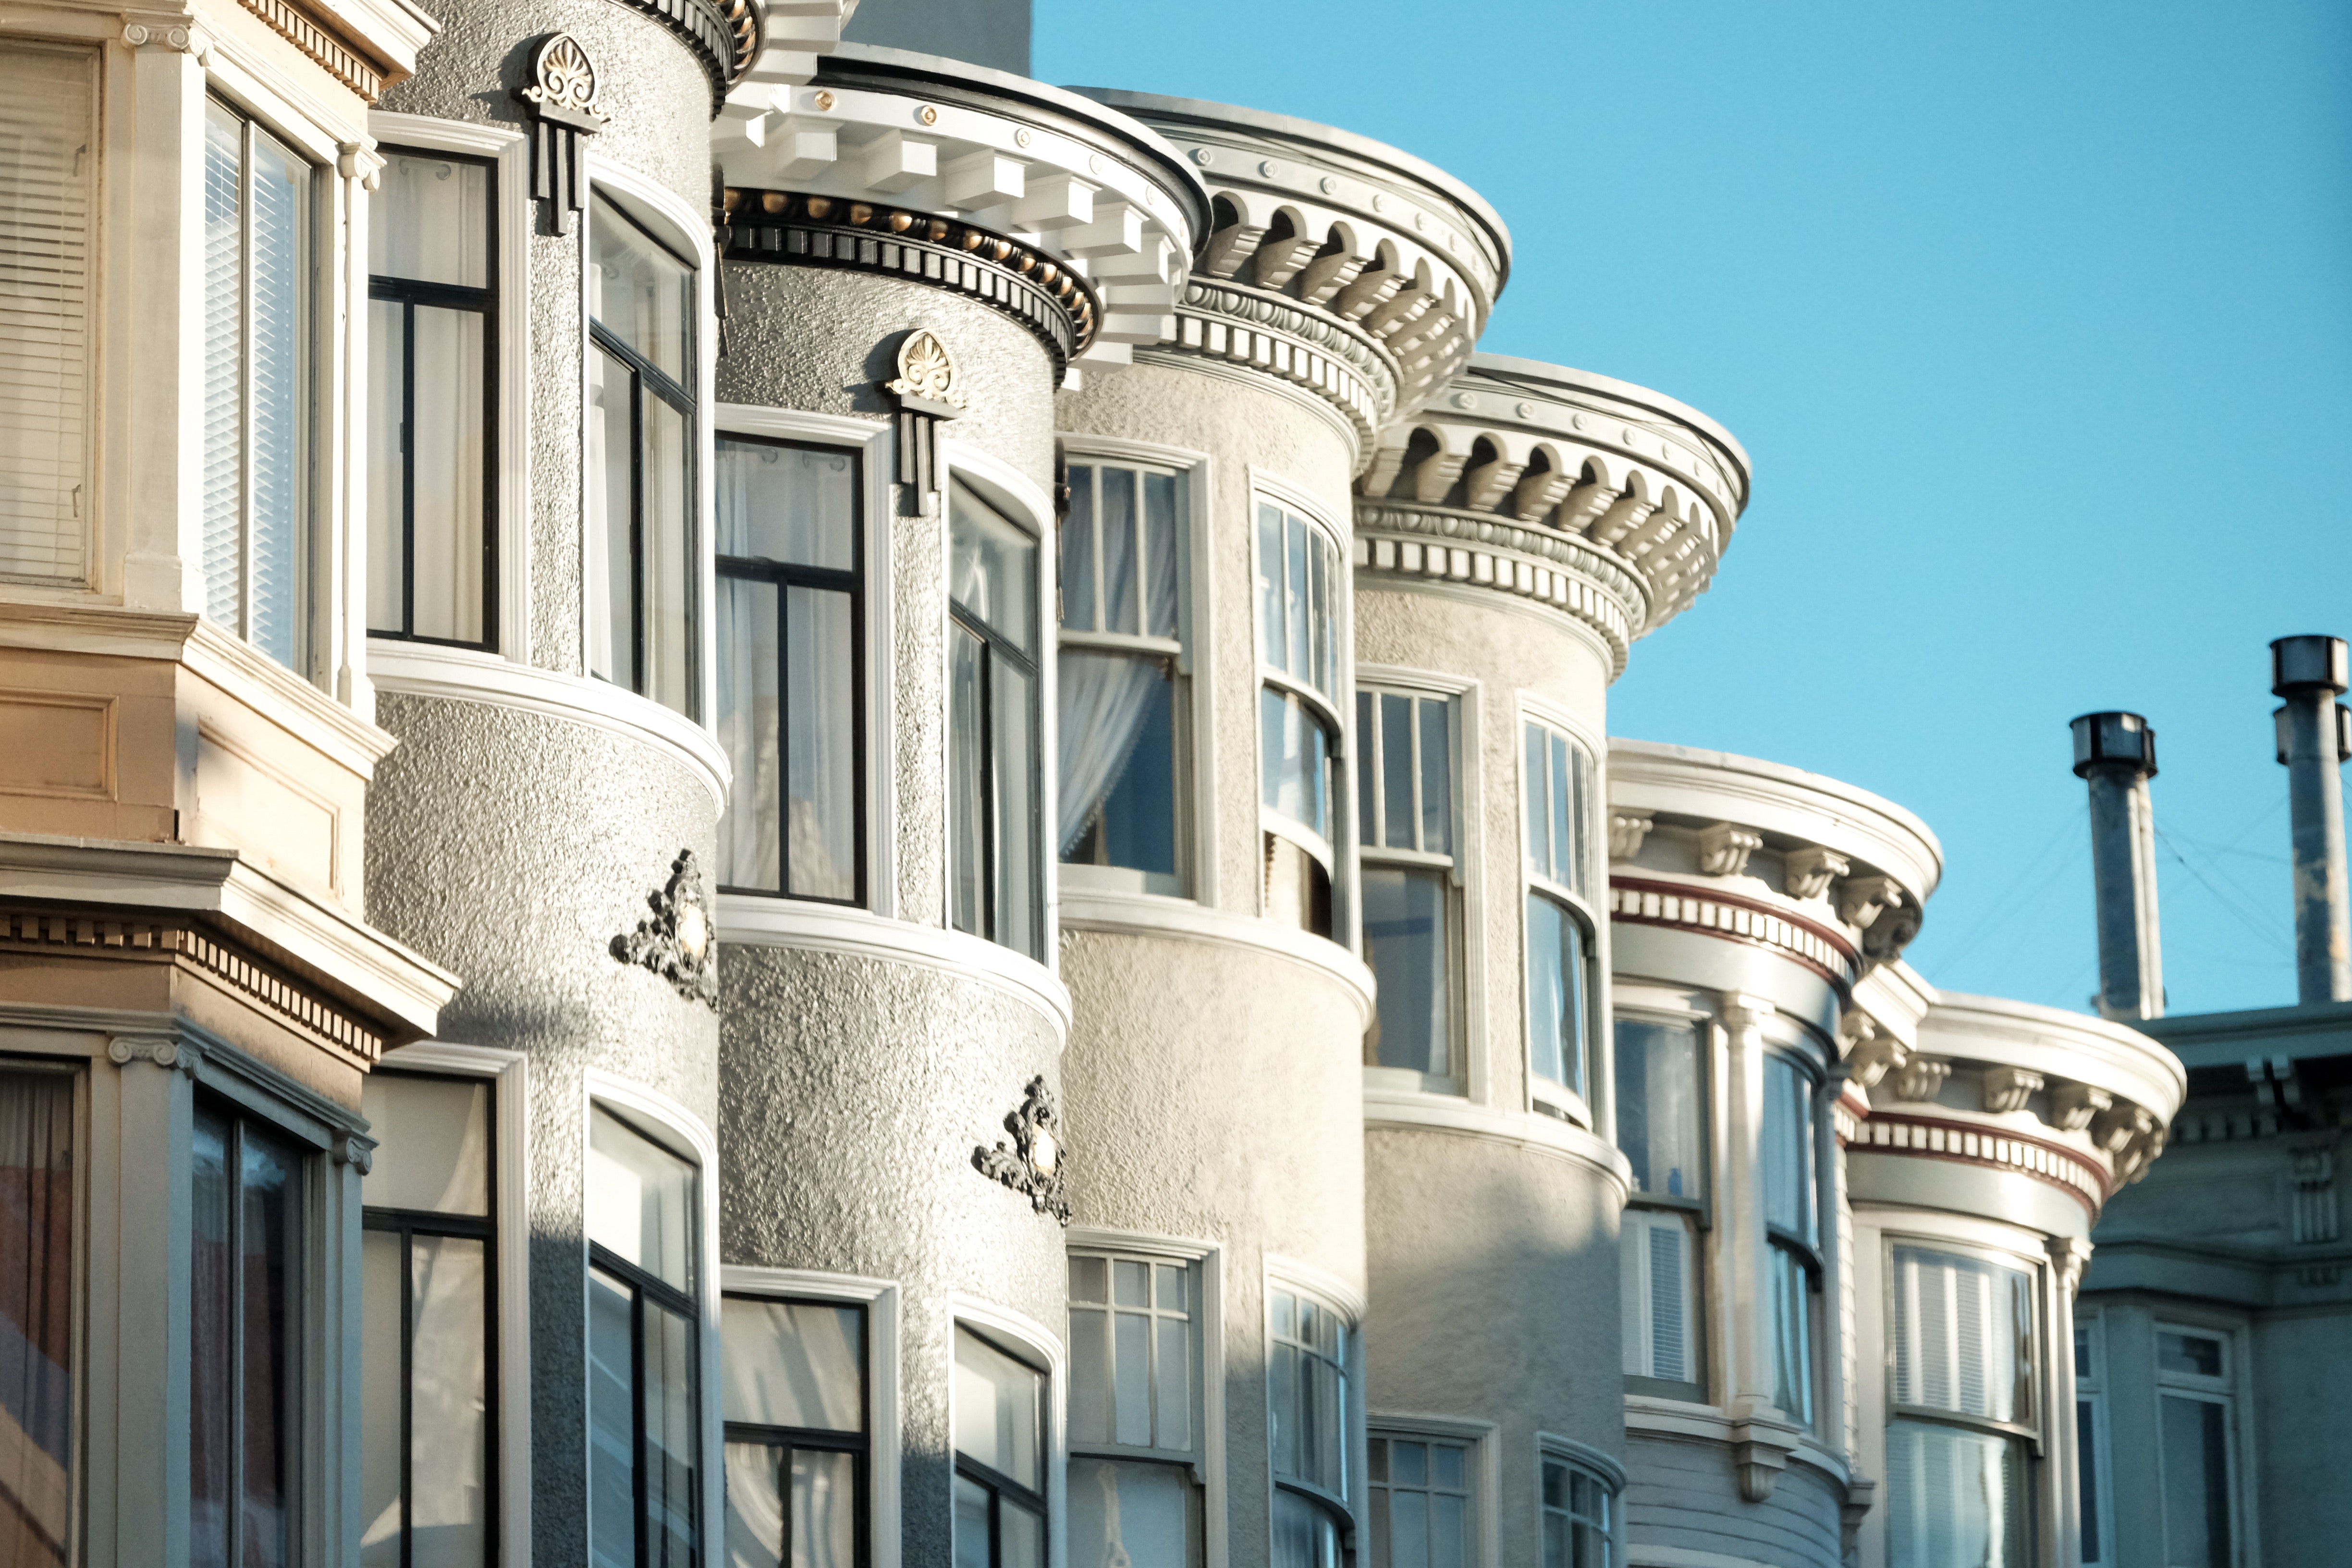 Living in a San Francisco Victorian is more affordable than it has been in years